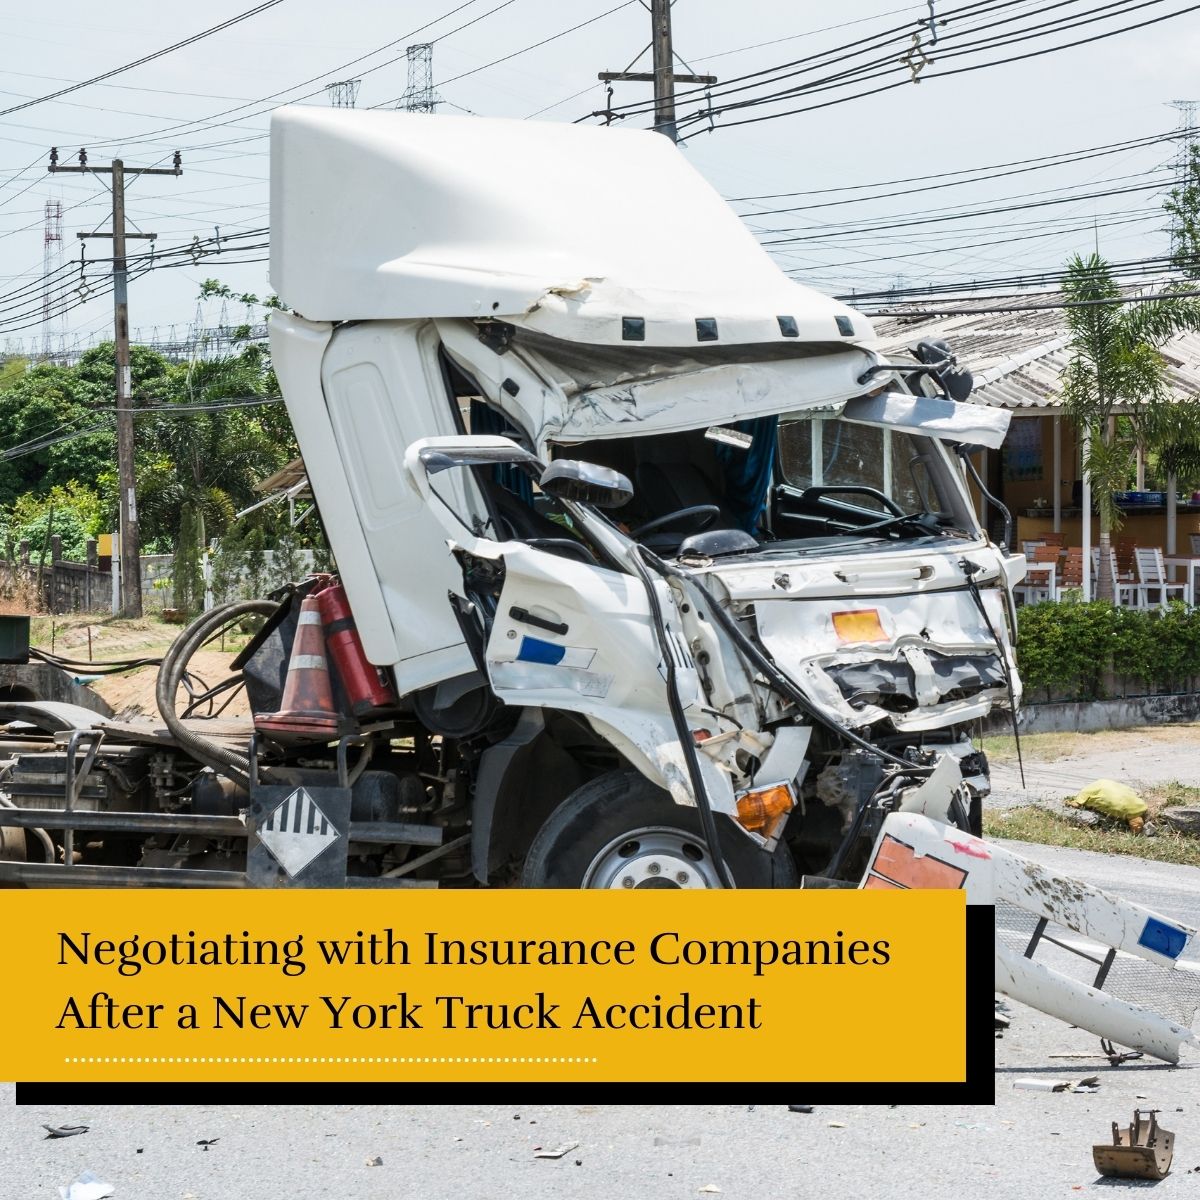 truck accident in new york - how to negotiate with insurance adjusters